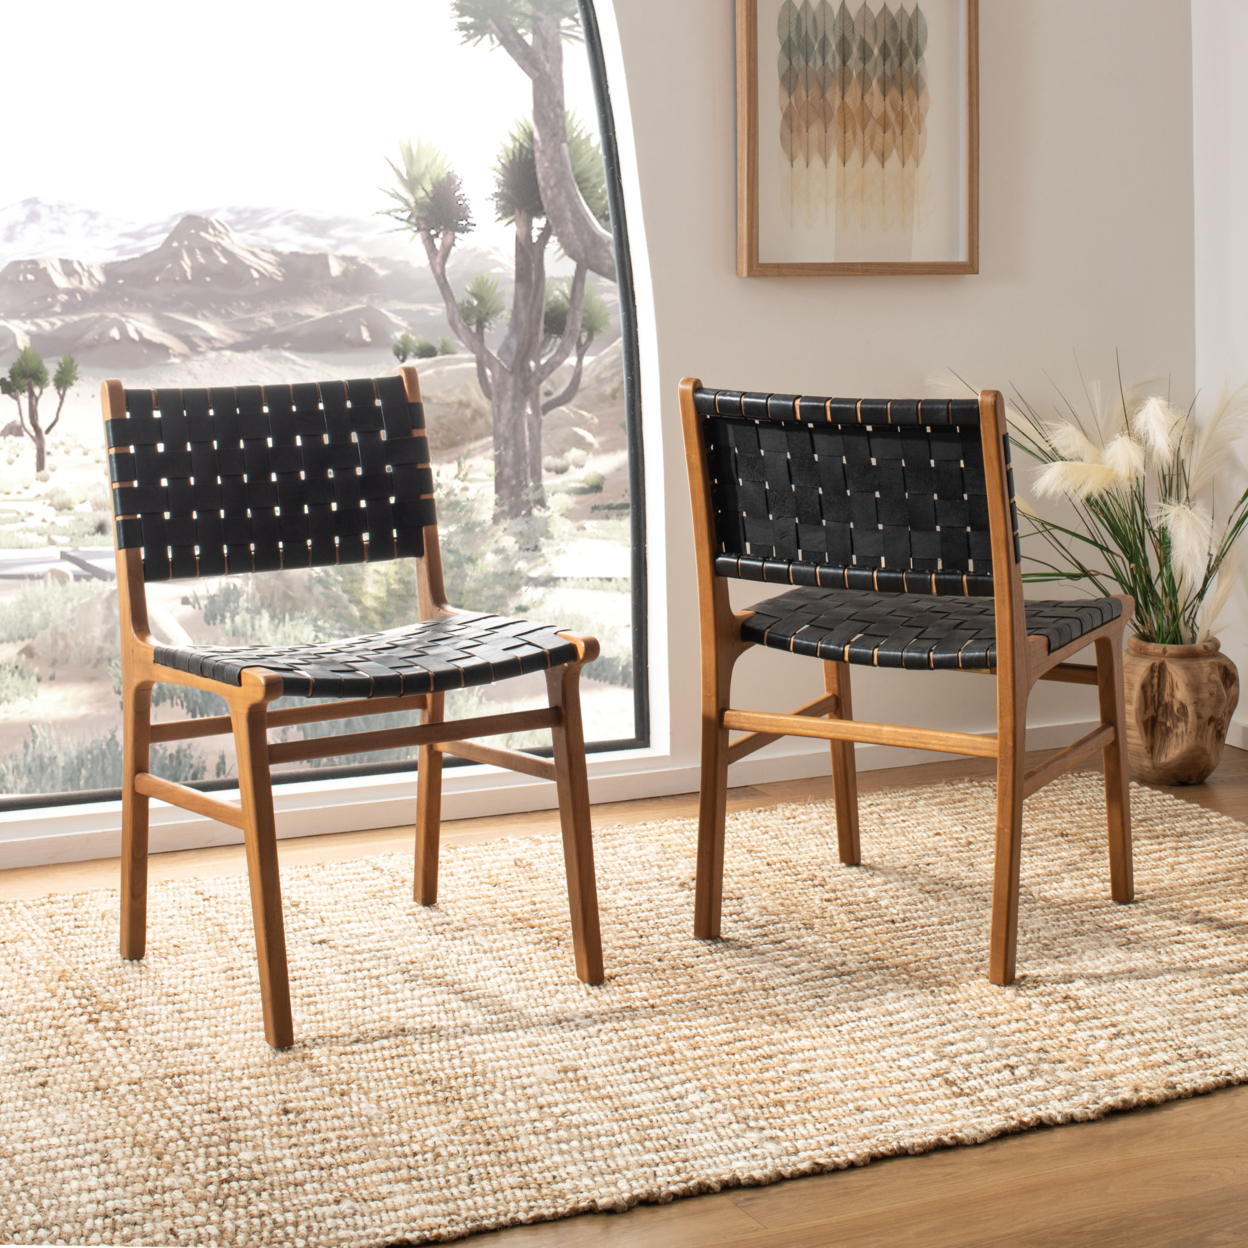 SAFAVIEH Taika Woven Leather Dining Chair Set Of 2 Black / Natural